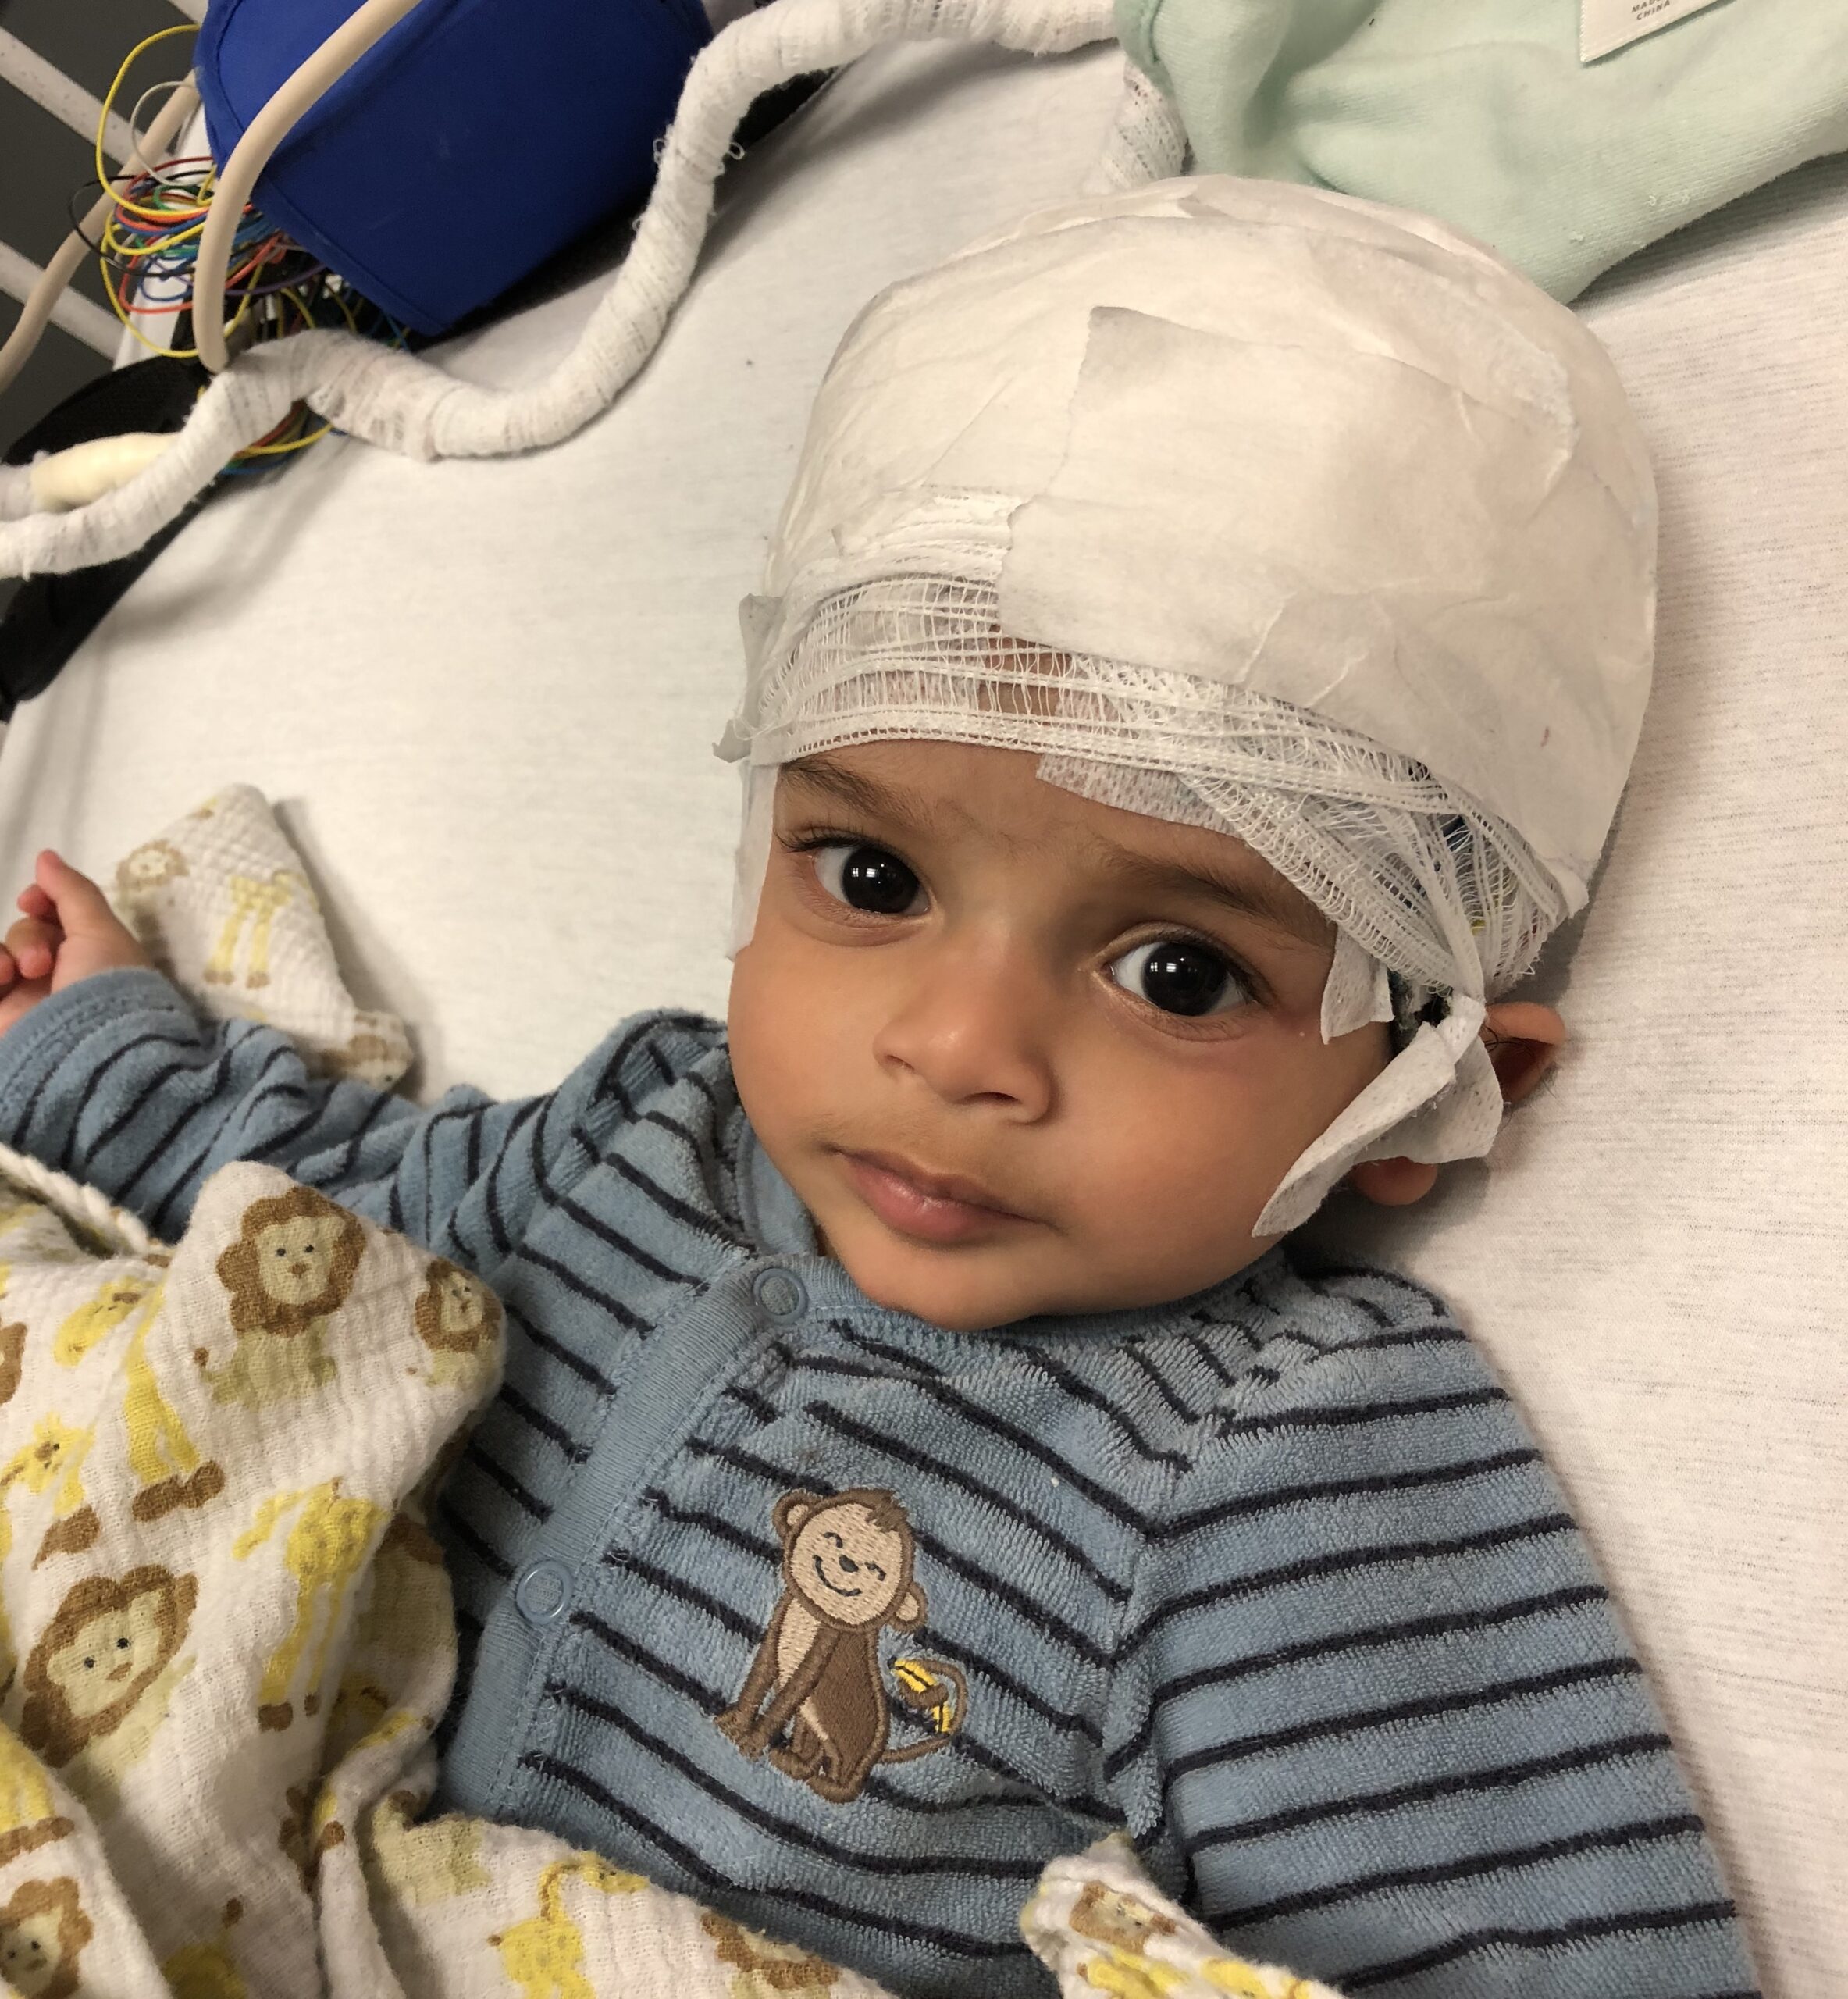 Ishaan is pictured undergoing an EEG following his first bout with seizures